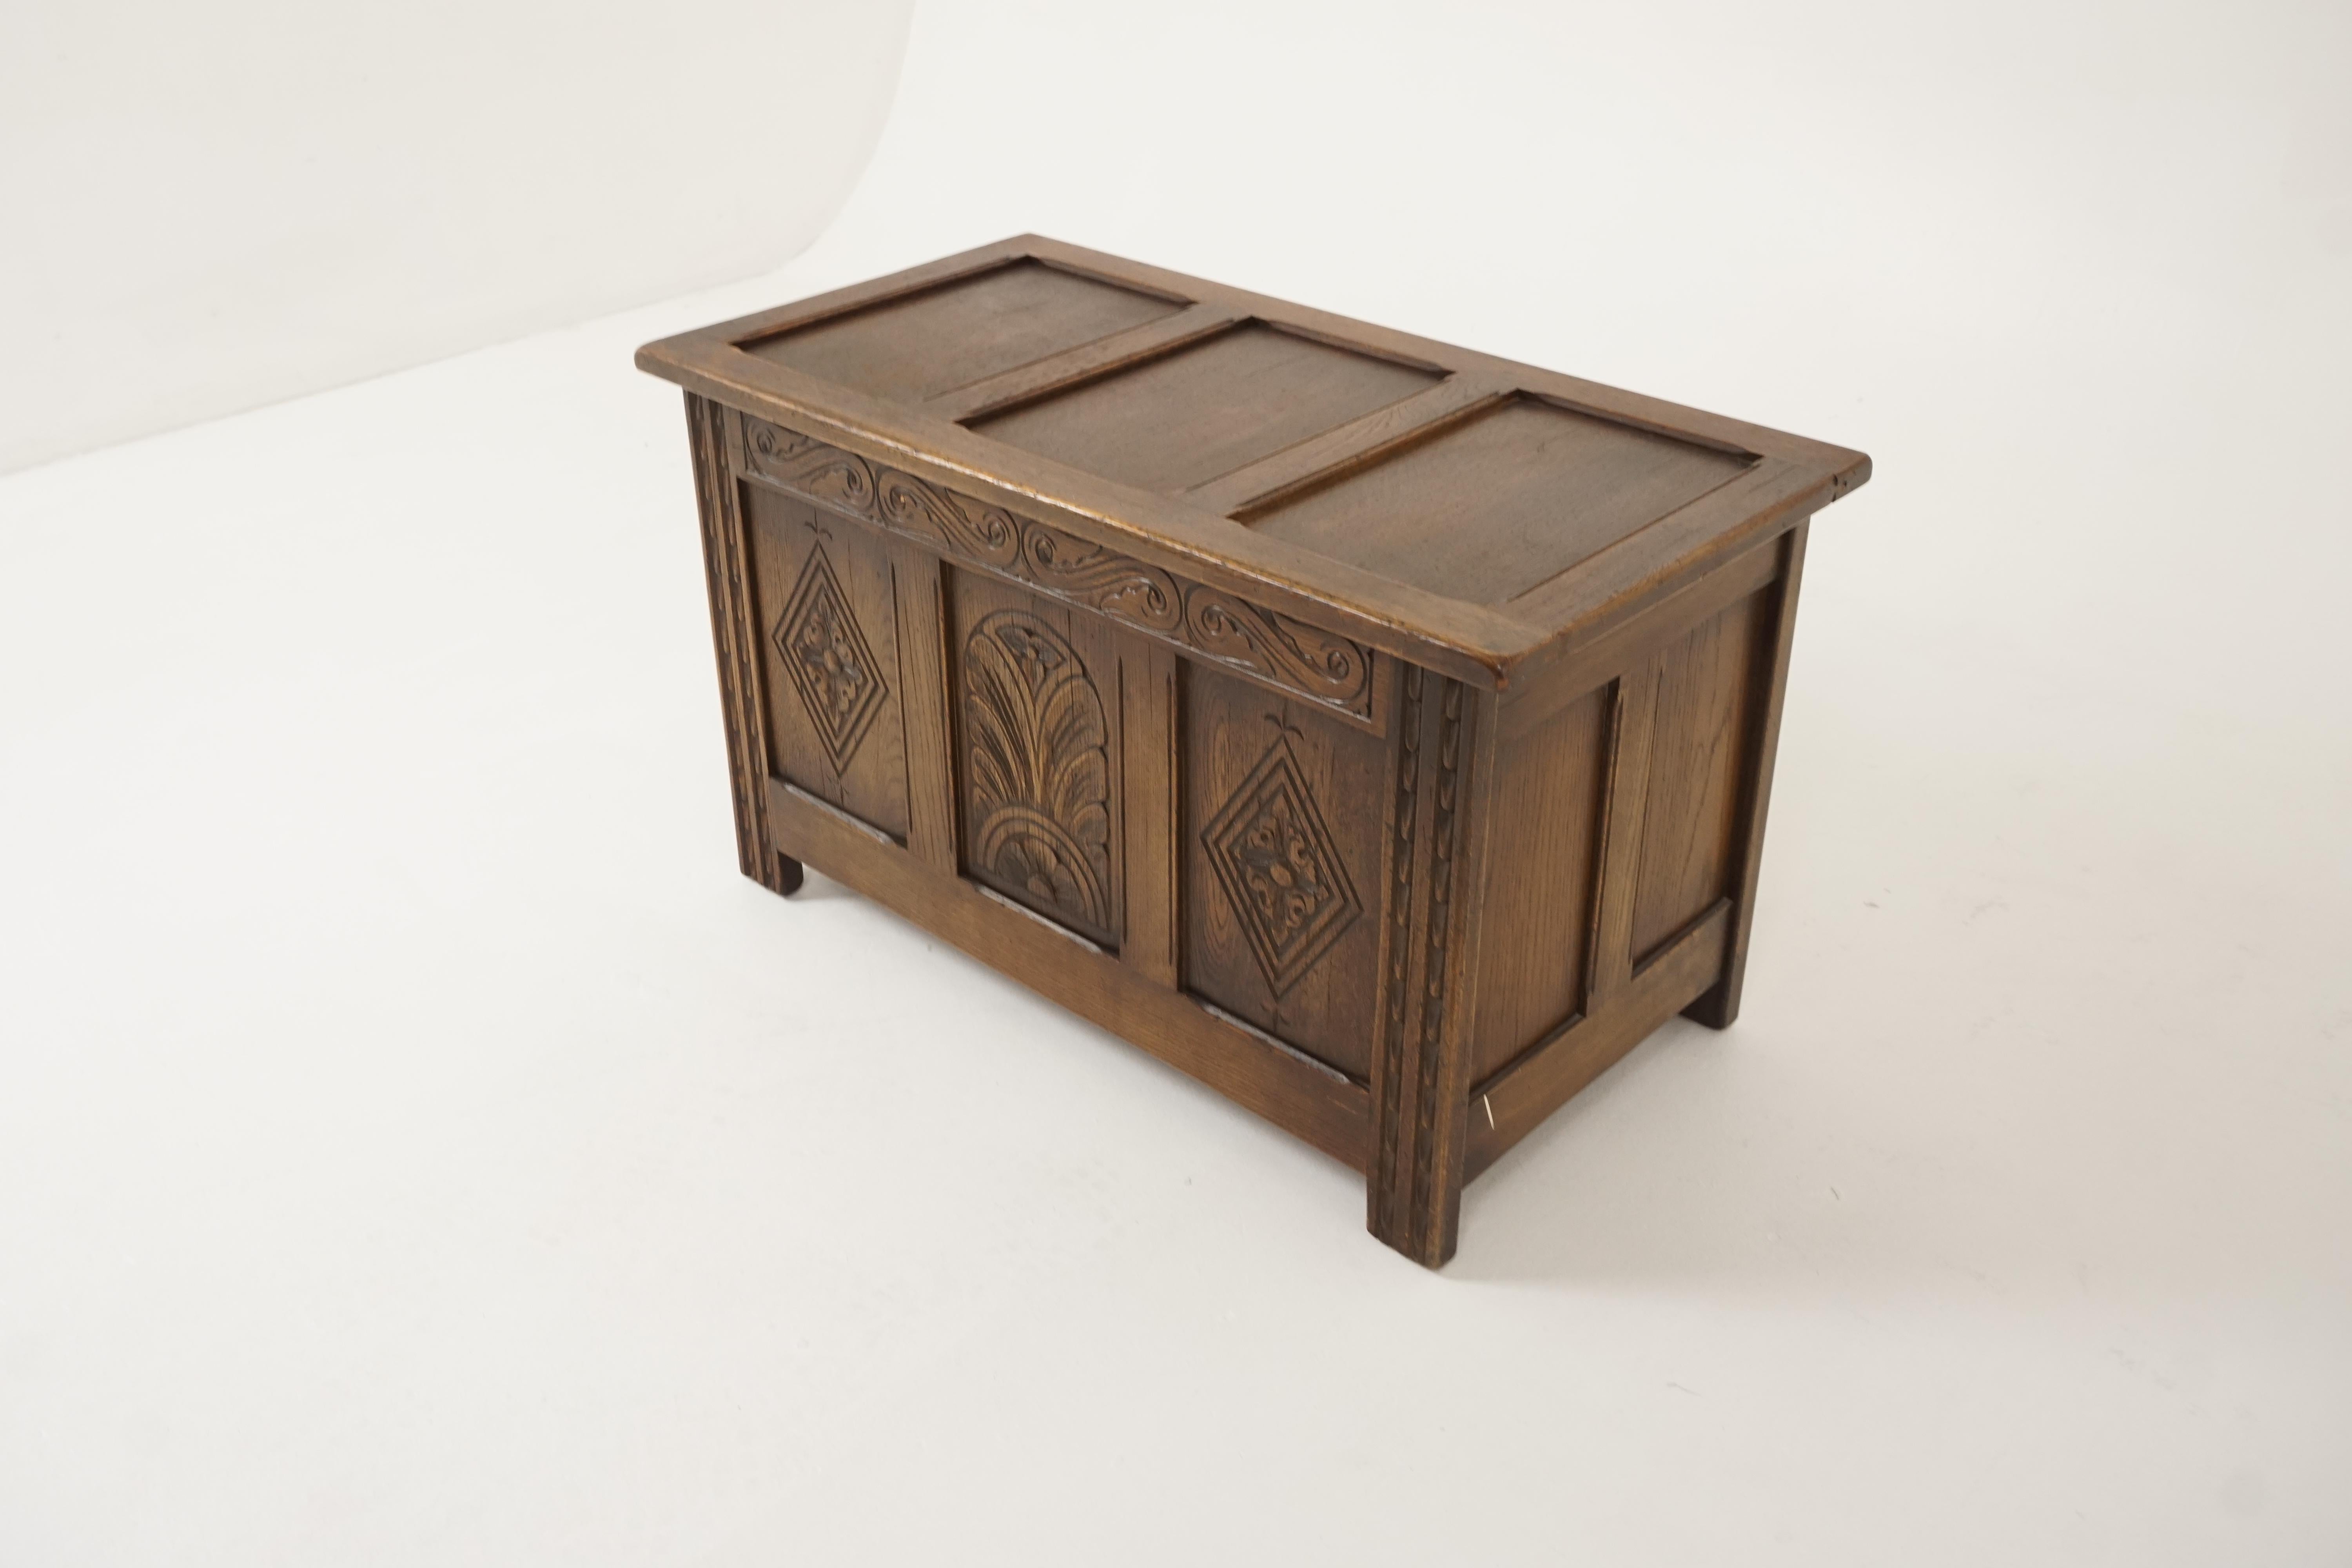 Vintage carved oak box, blanket box, toy box, coffee table, Scotland 1940, B2312

Scotland, 1940
Solid oak
Original finish
Three paneled top with paneled sides
Three paneled carved oak front
Very condition

B2312

Measures: 32.5